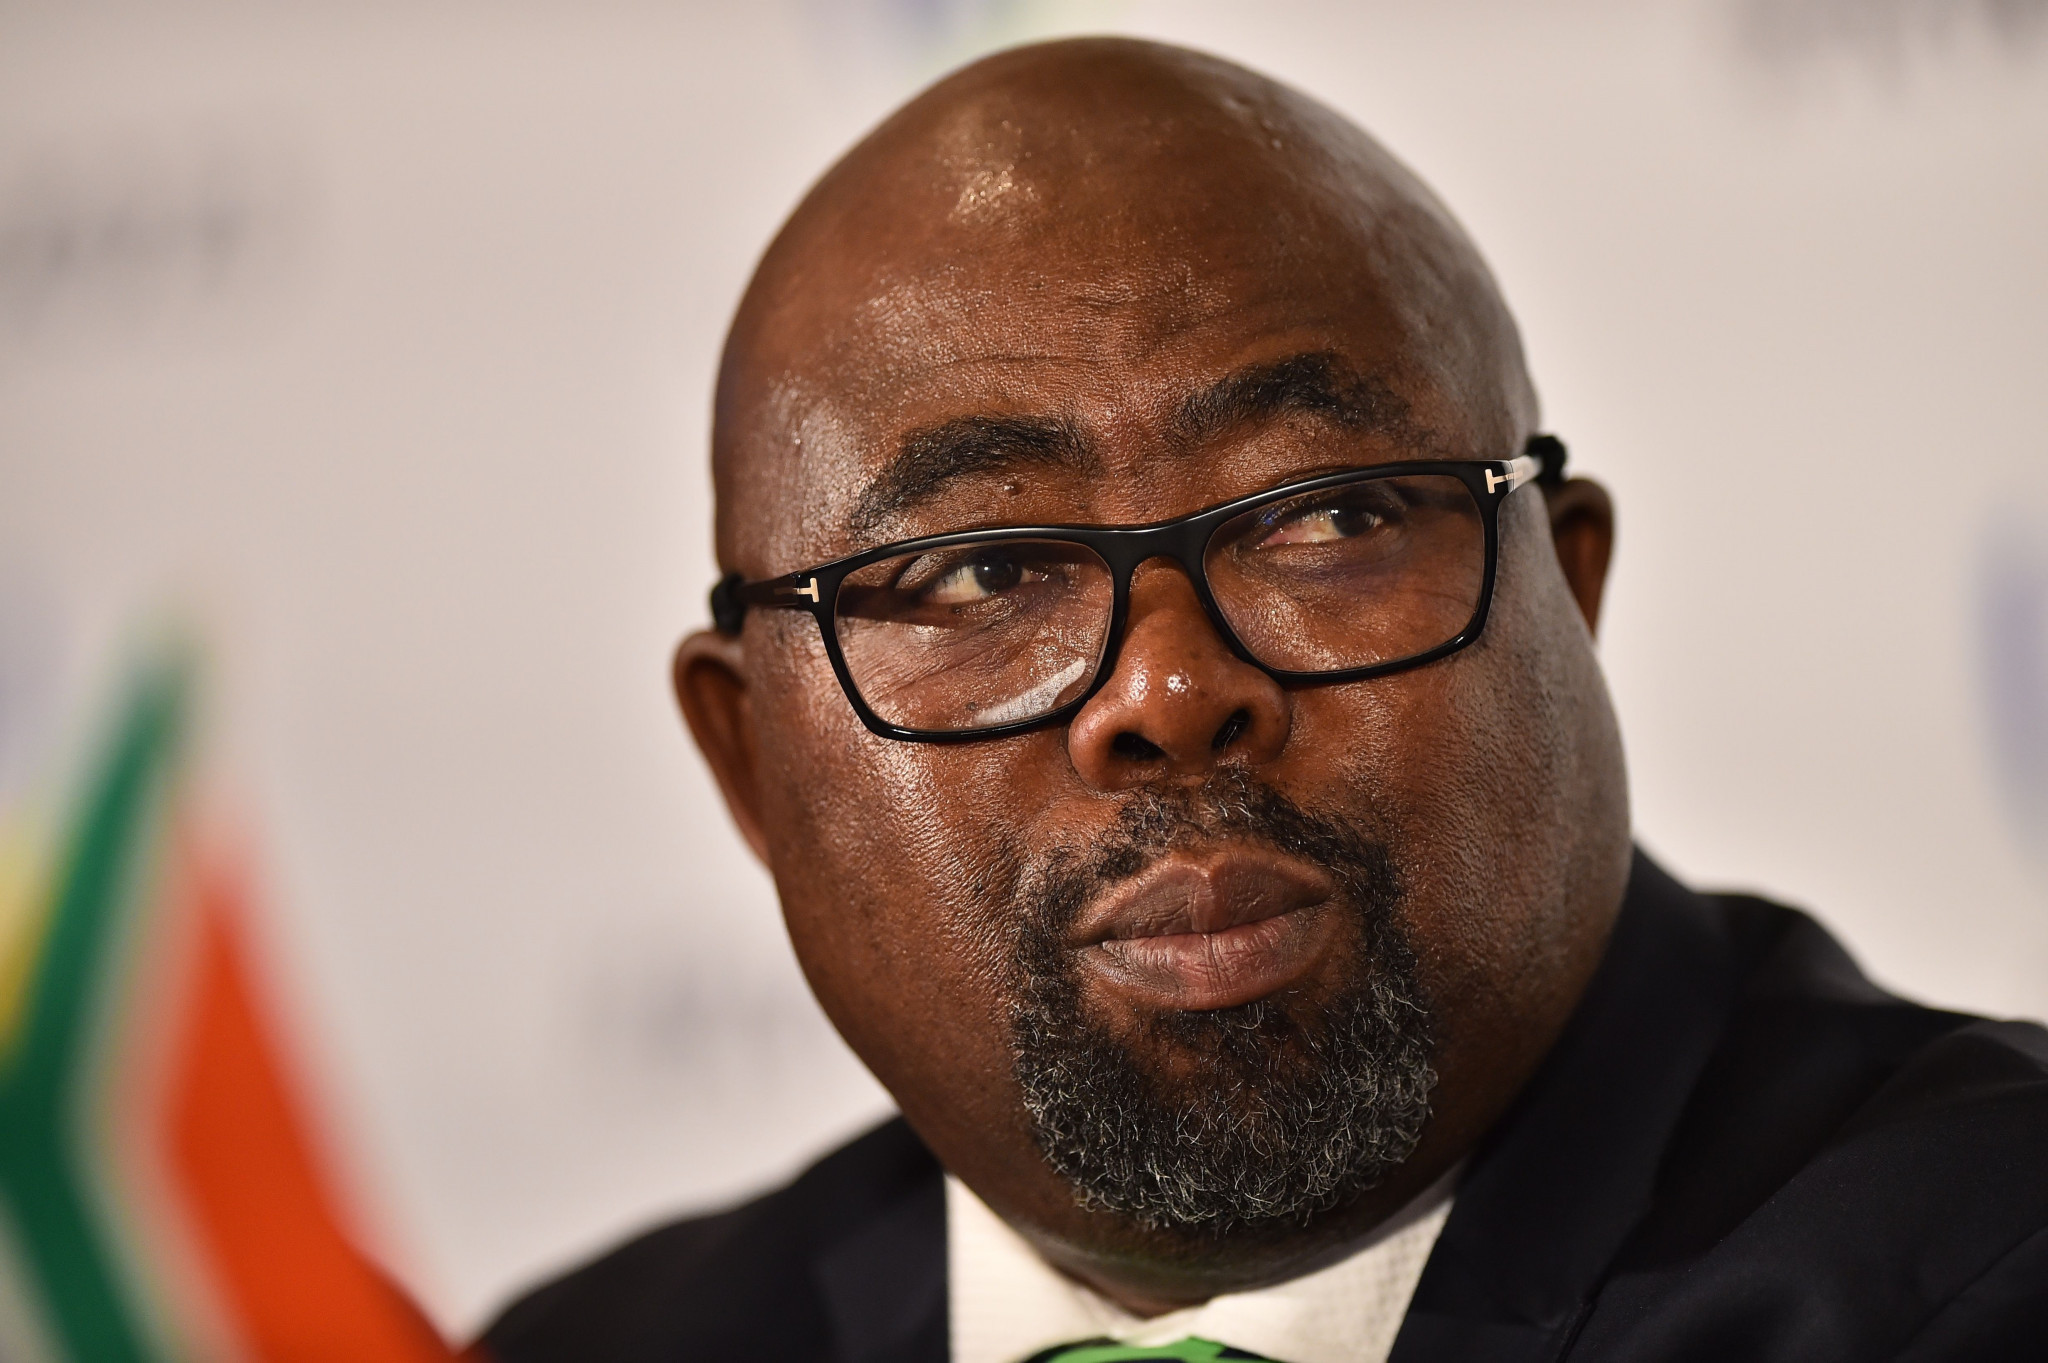 South Africa's Sports Minister Thembelani Nxesi established the inquiry into allegations of misconduct at SASCOC ©Getty Images